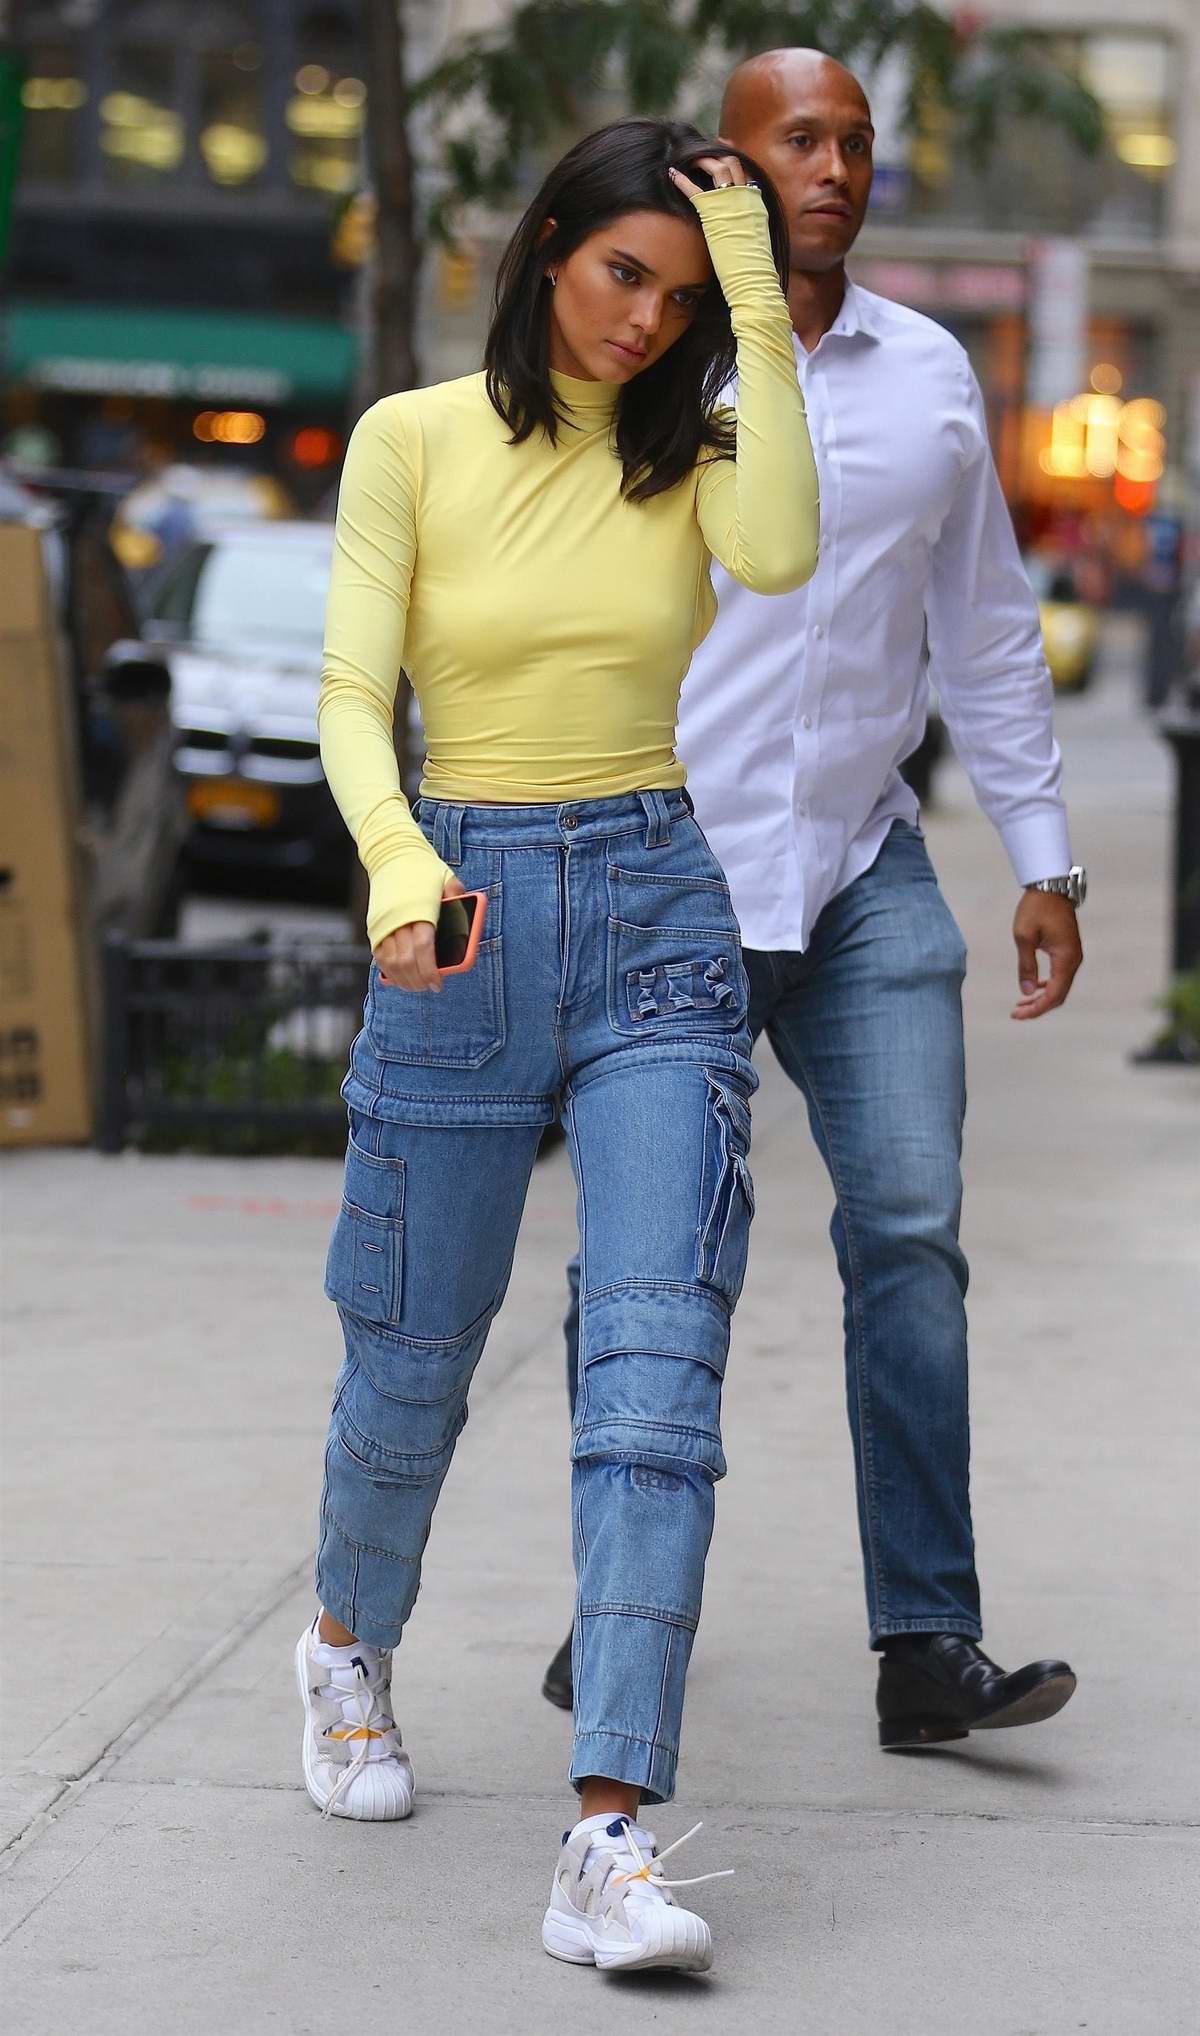 Kendall Jenner seen wearing a neon top with high waisted jeans and sneakers  as she leaves